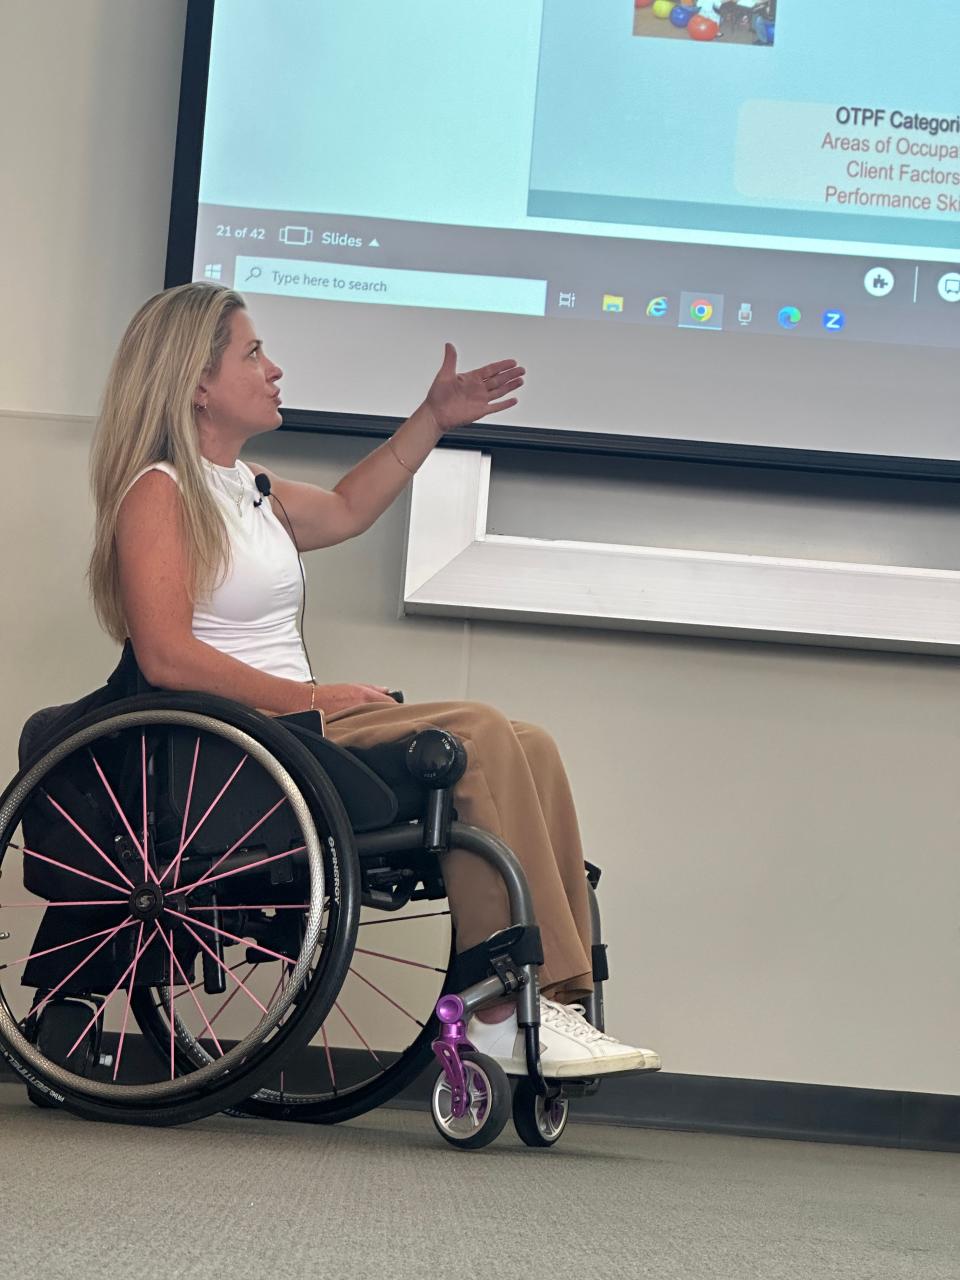 Amanda Parezo teaches aspiring occupational therapists at Thomas Jefferson University in Philadelphia. She was struck by a stray bullet in 2021 and lost the use of her legs.